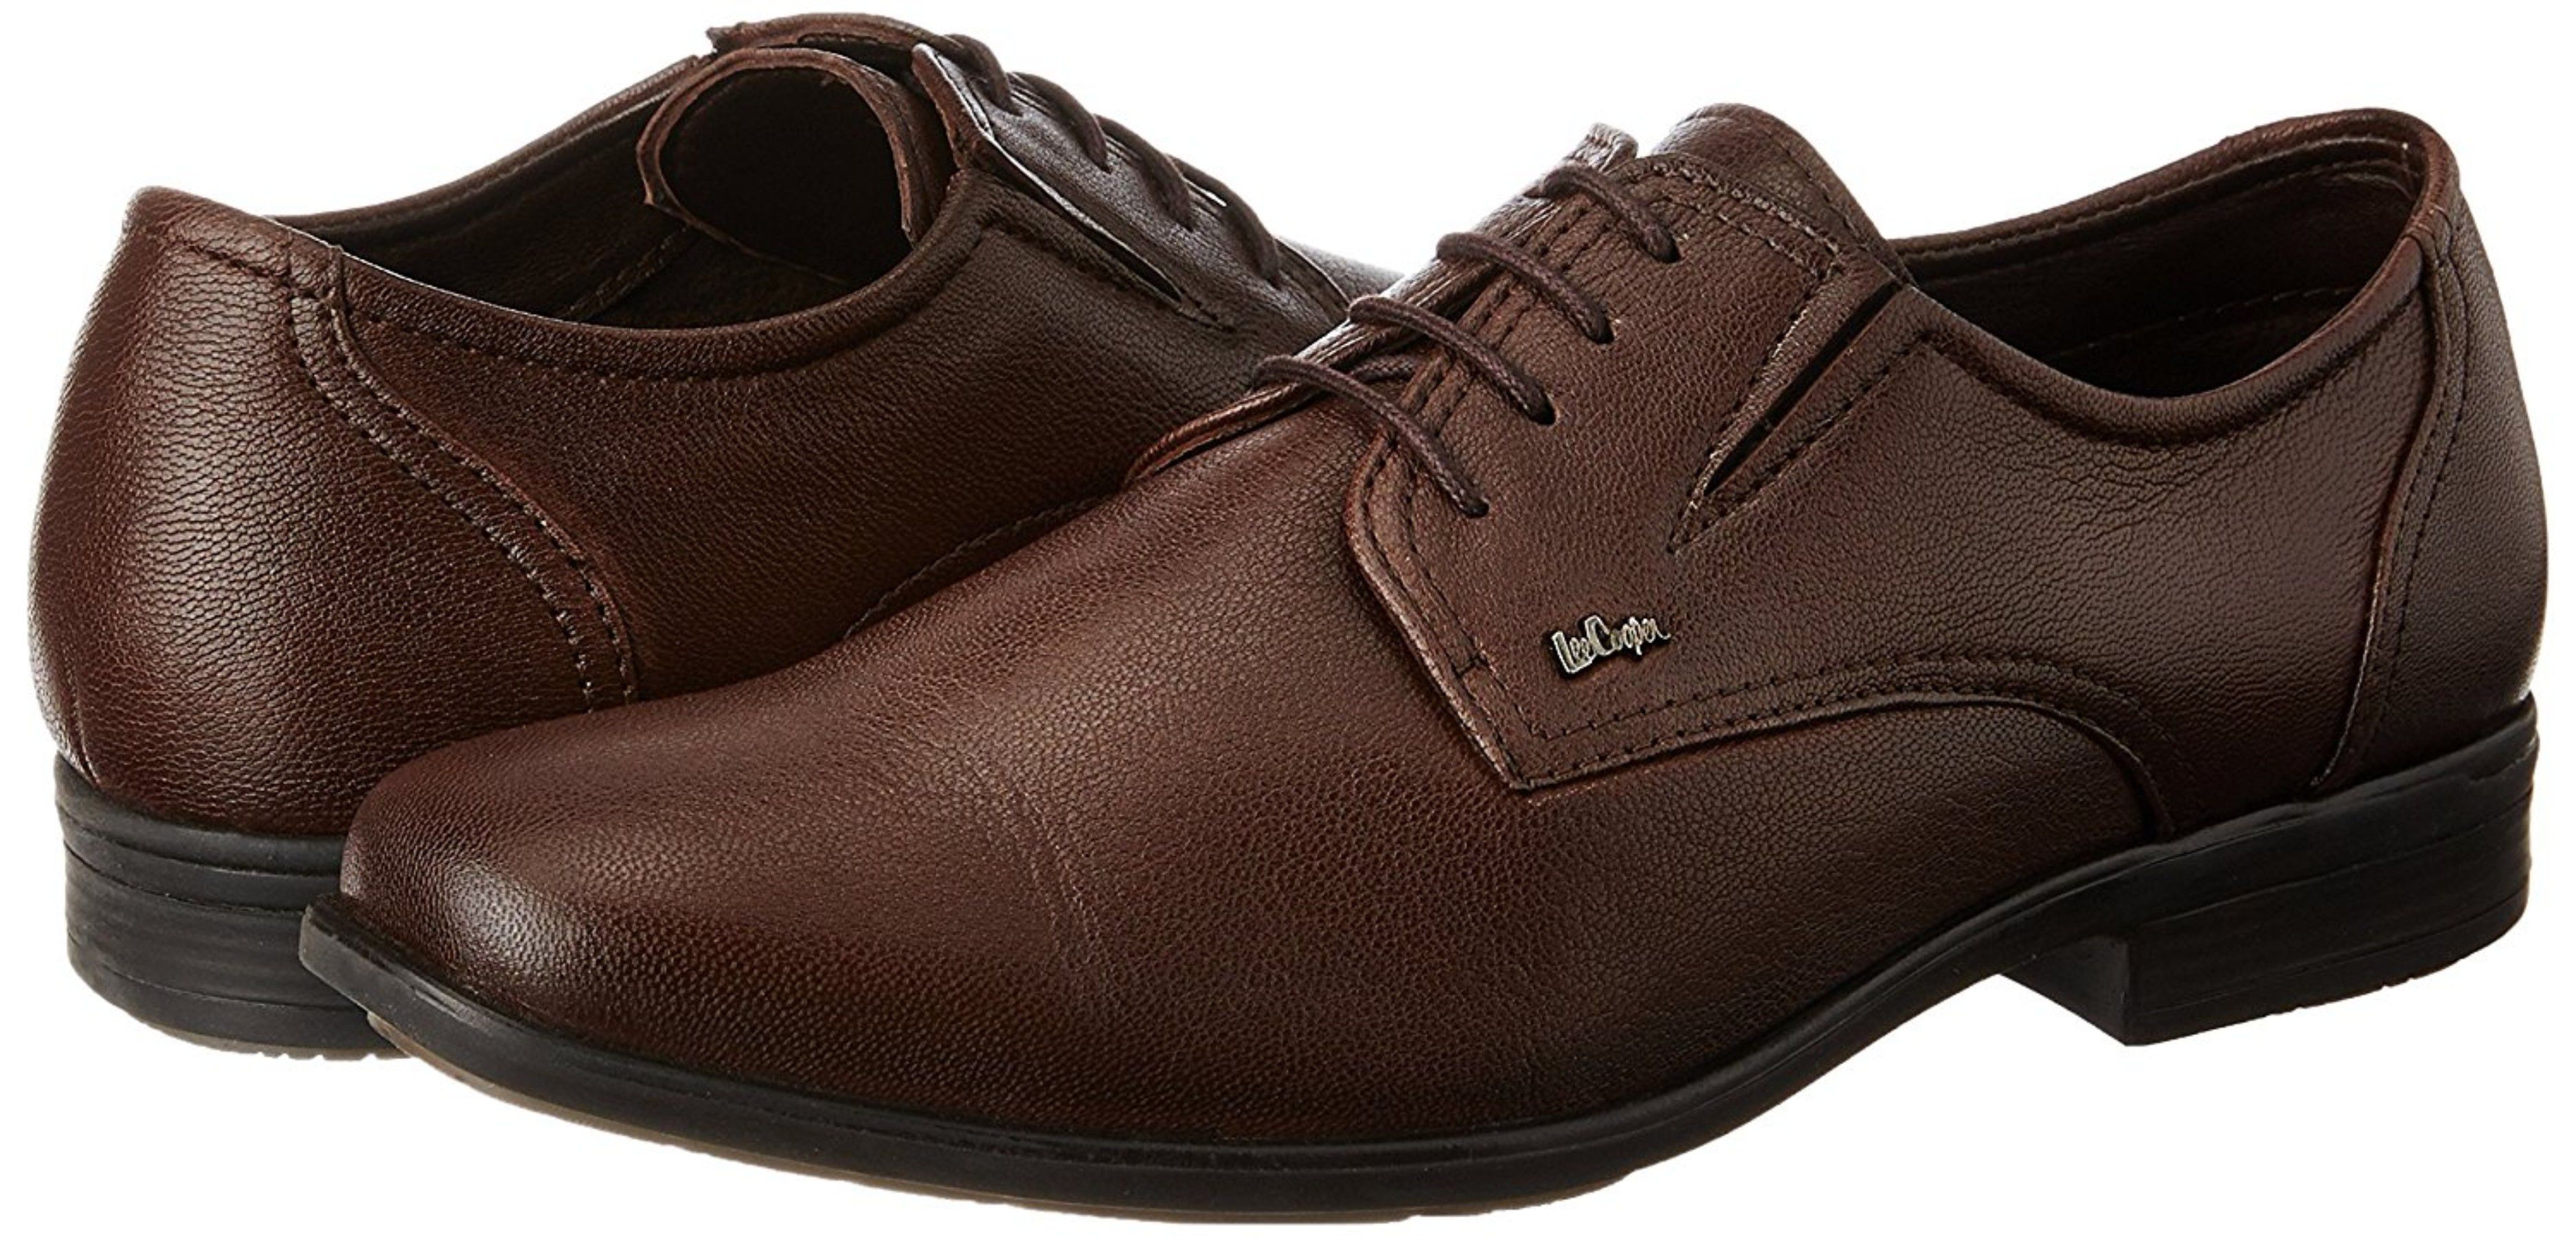 Lee Cooper Derby Genuine Leather Brown Formal Shoes Price in India- Buy ...